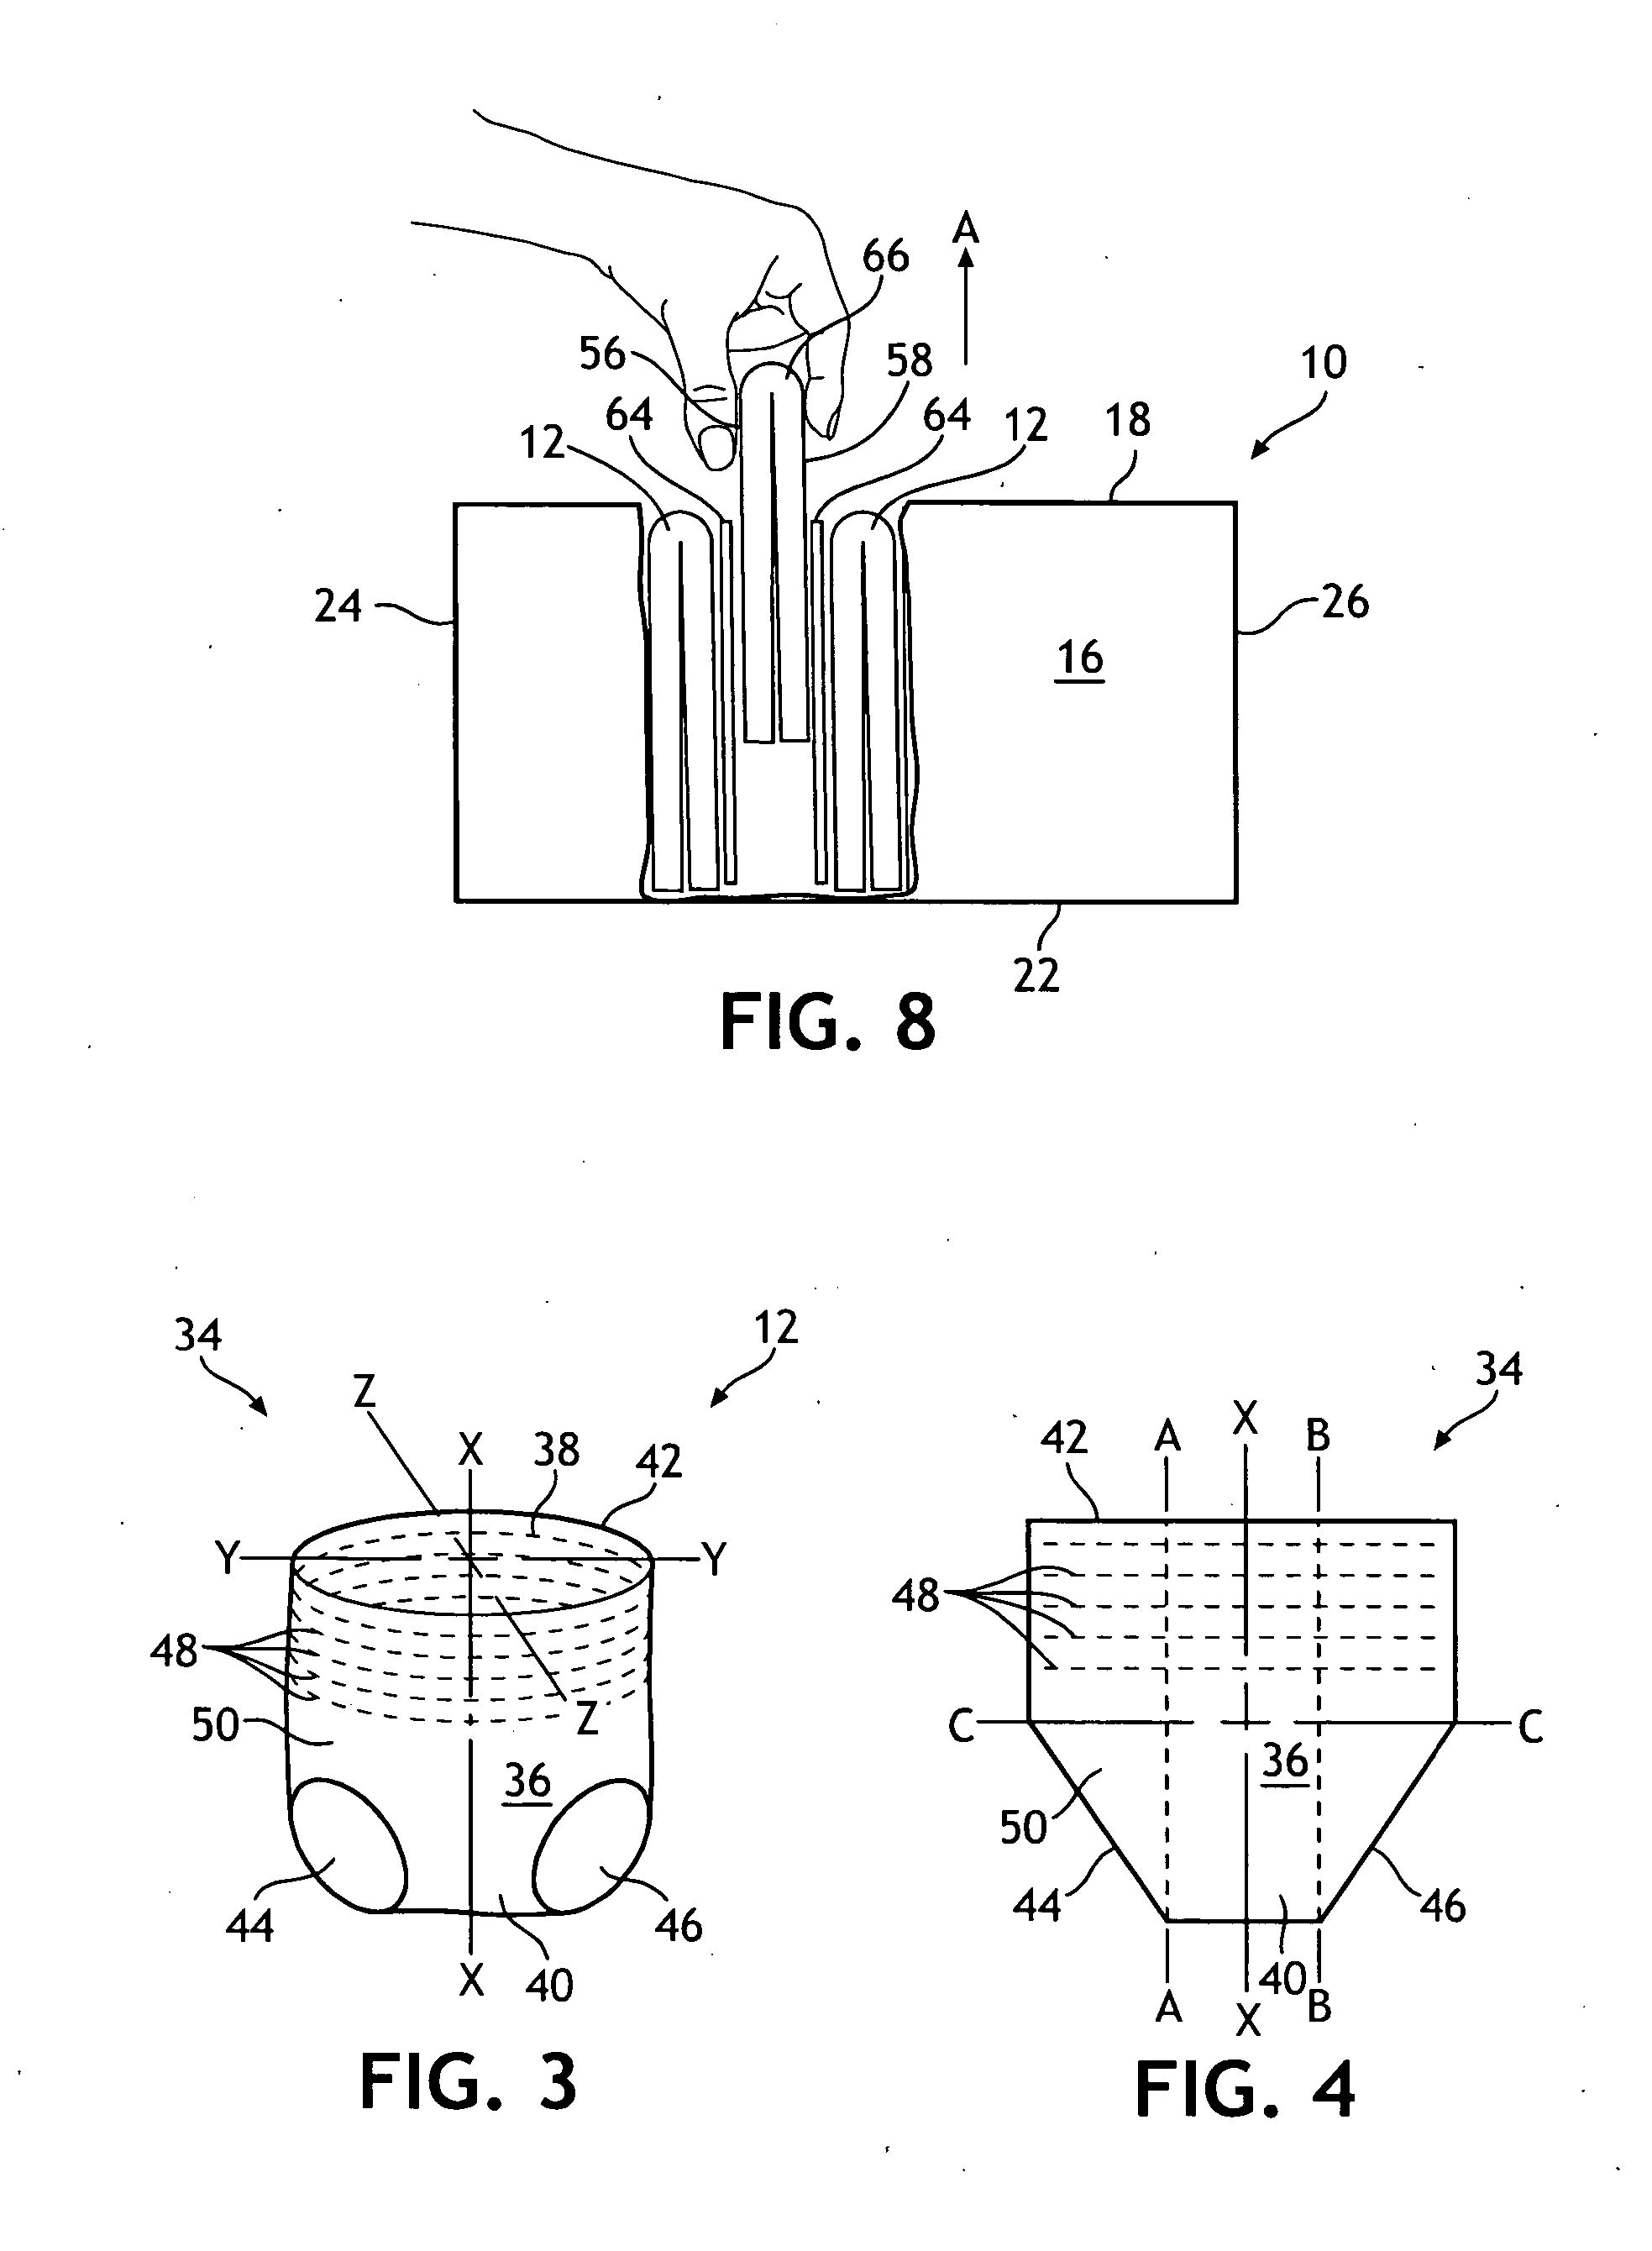 Dispensing aid for facilitating removal of individual products from a compressed package